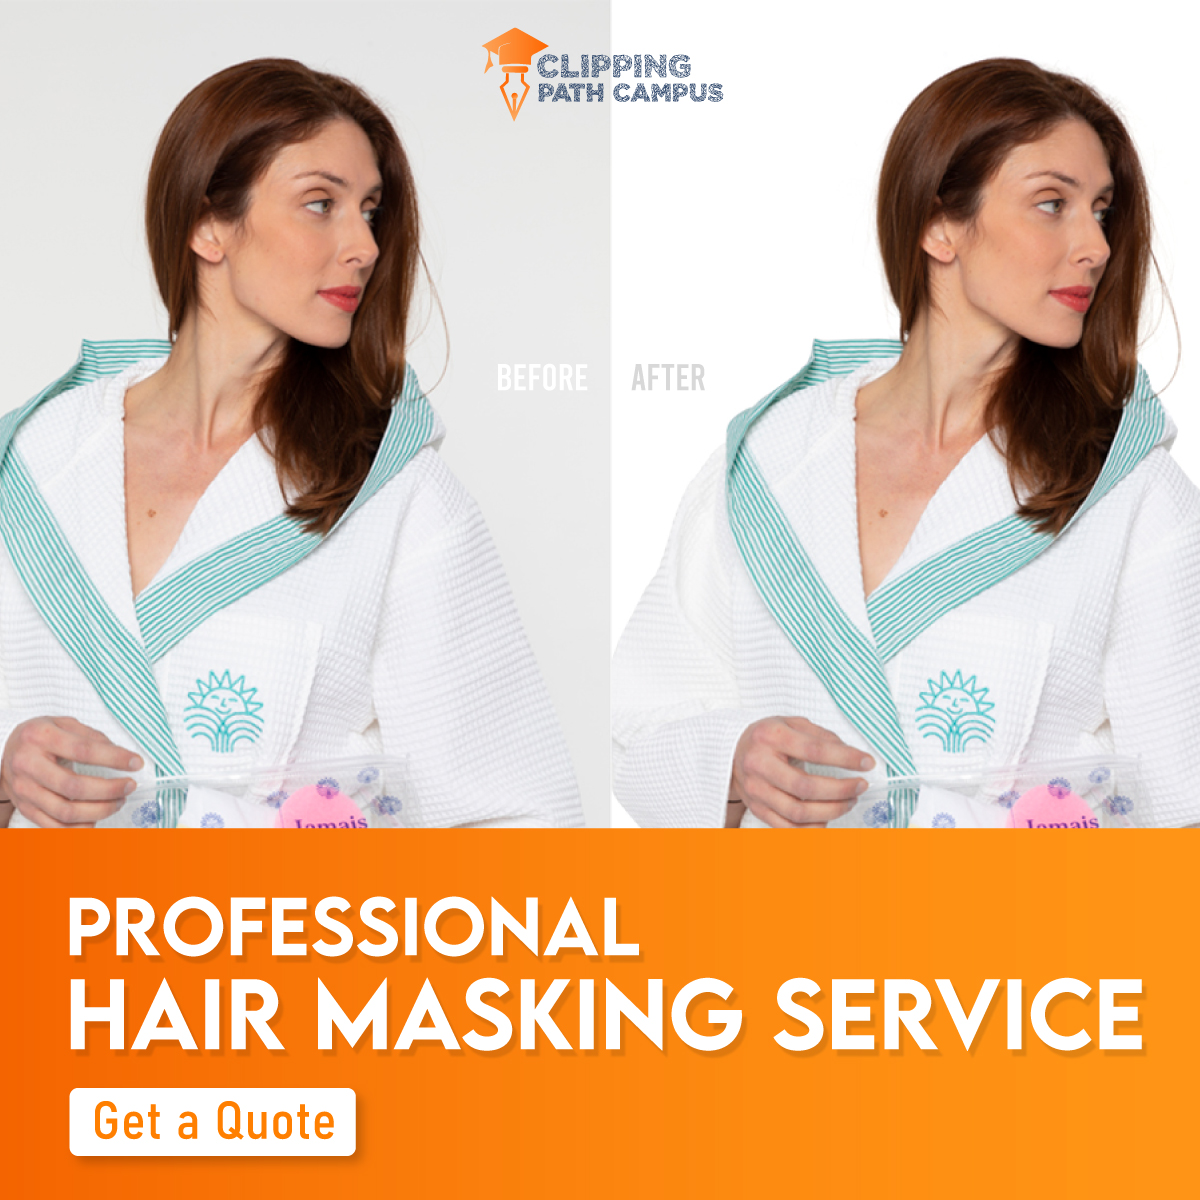 Hair masking is a daunting task, especially concerning intricate details. We put extra effort in giving you the best possible output. 

Get professional hair masking through our photo editing experts.

Get started with a free trial!

#hairmasking #imageediting